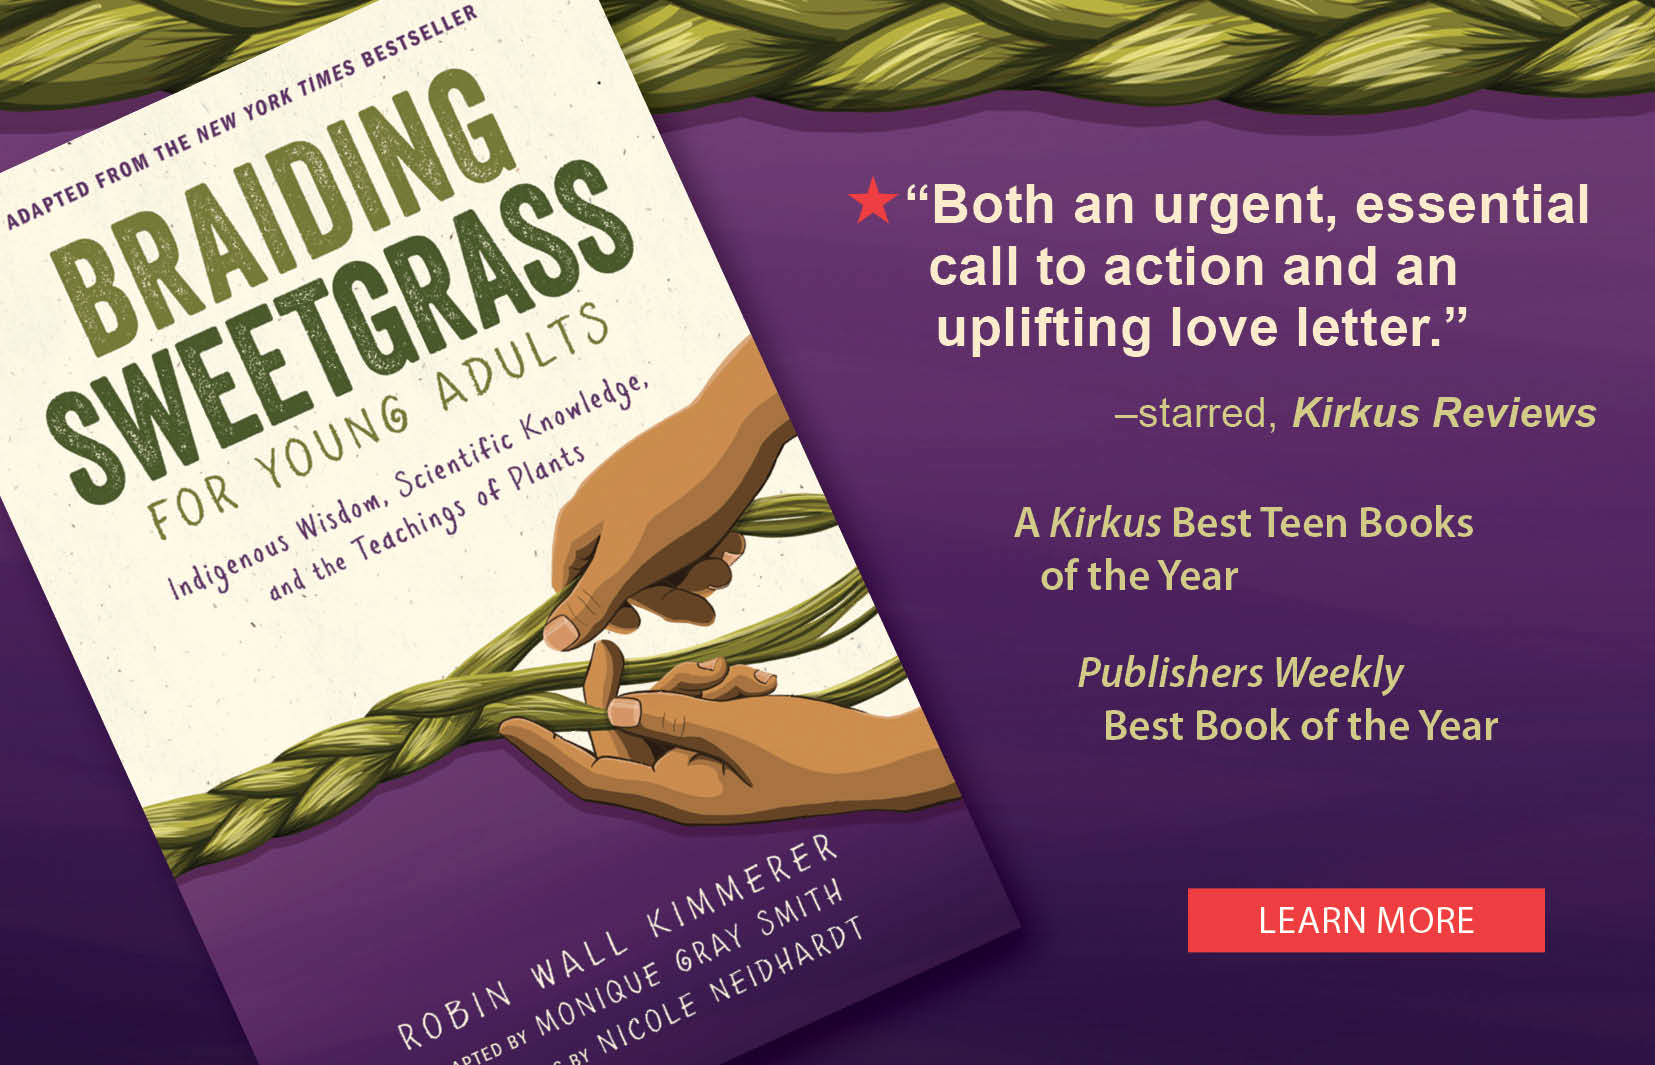 Spring 24 Braiding Sweetgrass for Young Adults